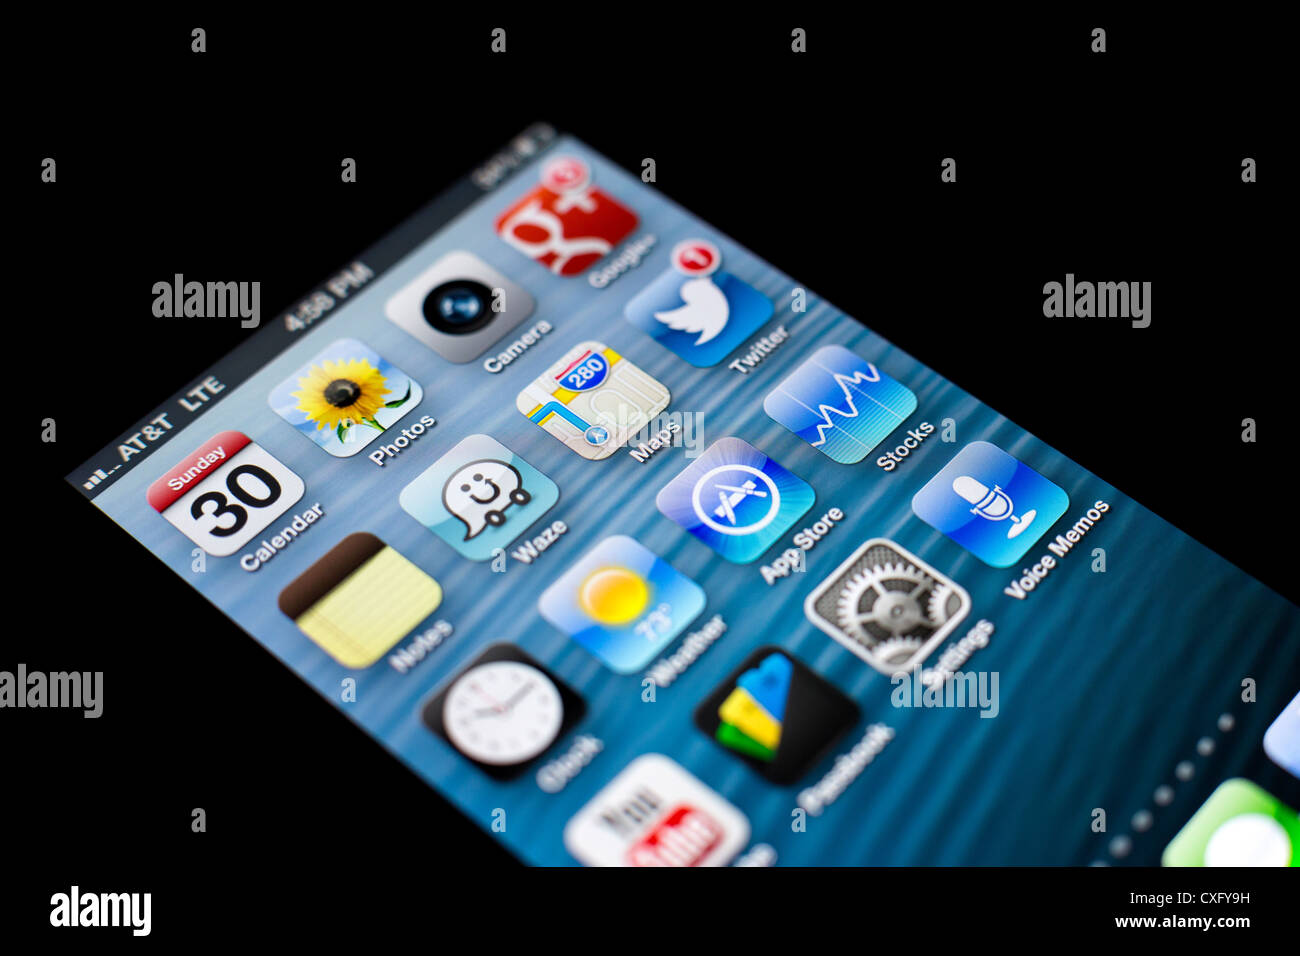 Screen of the new iPhone 5 showing new Maps app and other various apps: Passbook, Twitter, App Store, Clock, Wuze, YouTube, G+ Stock Photo